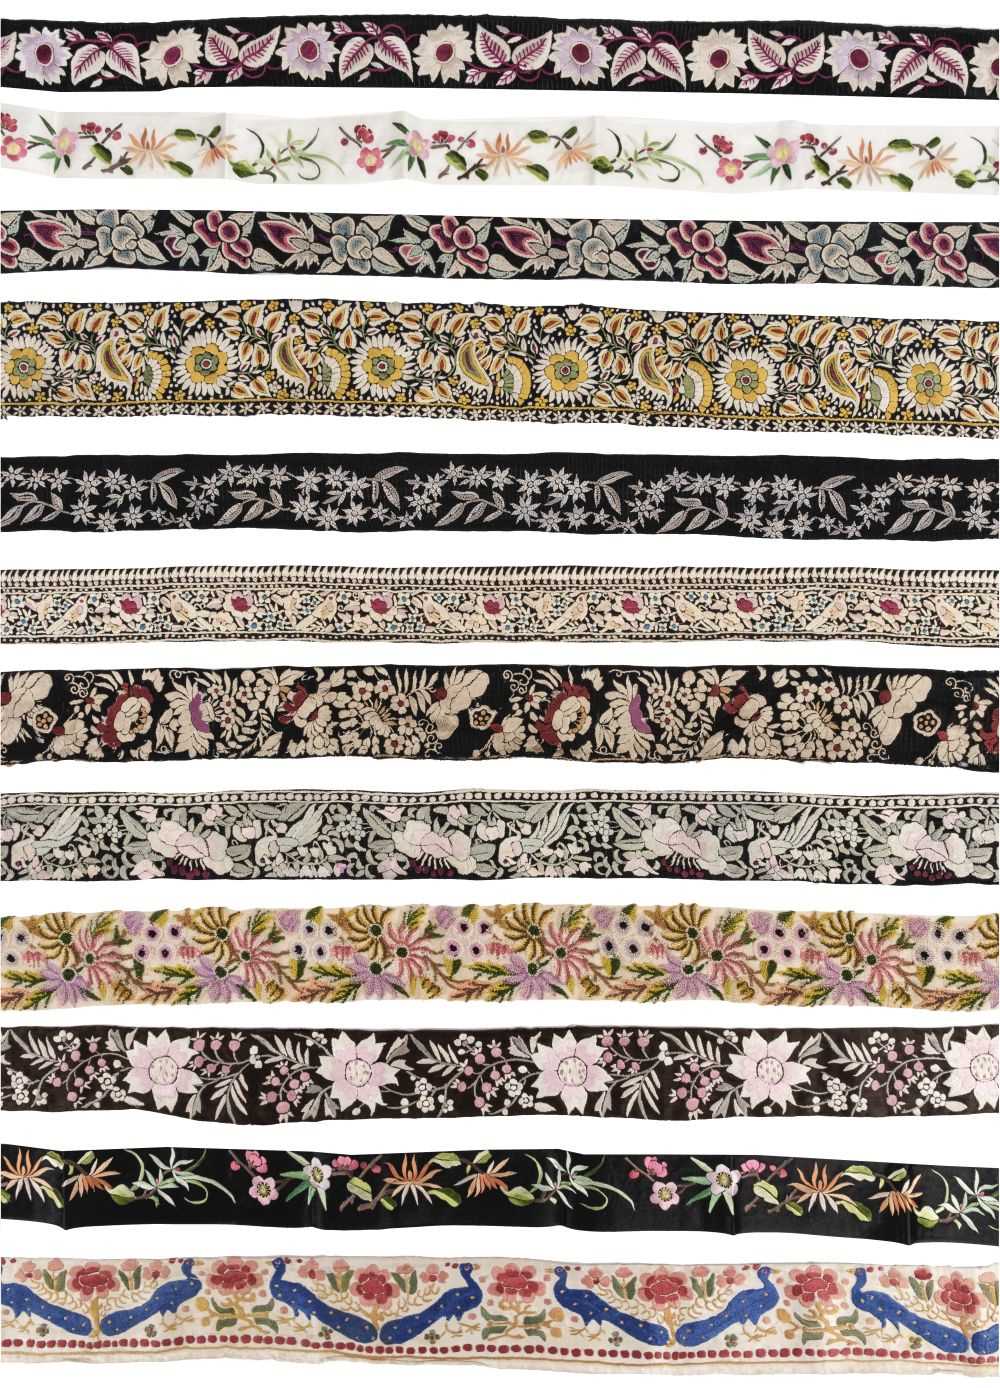 716 - Chinese Embroideries. A collection of needlework borders, 19th-early 20th century